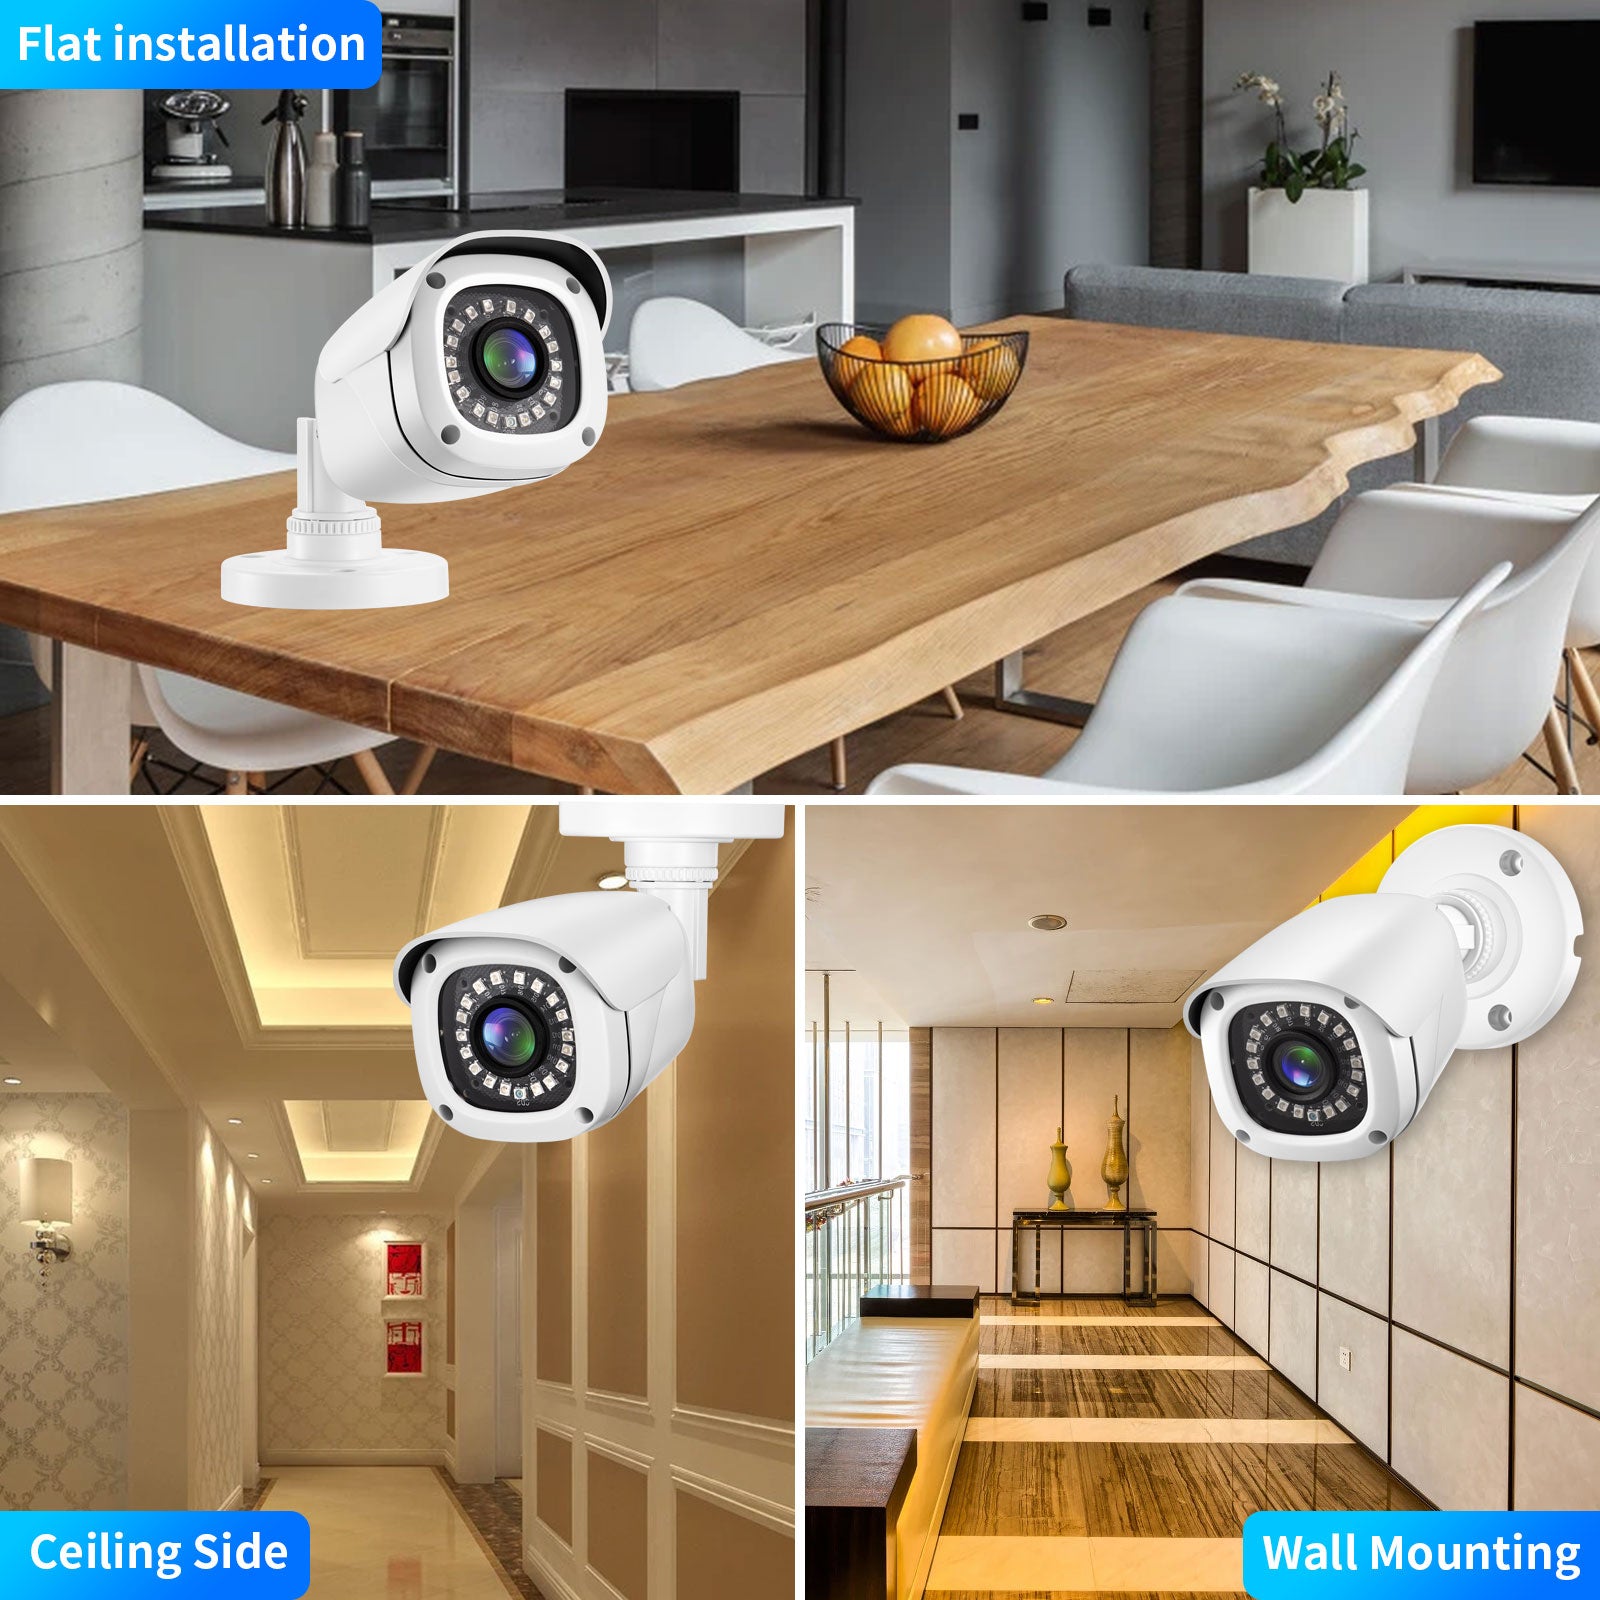 AHD Camera 720P 1080P 5MP High Definition Wired Home Surveillance Infrared Night Vision BNC CCTV Security Outdoor Bullet Camera